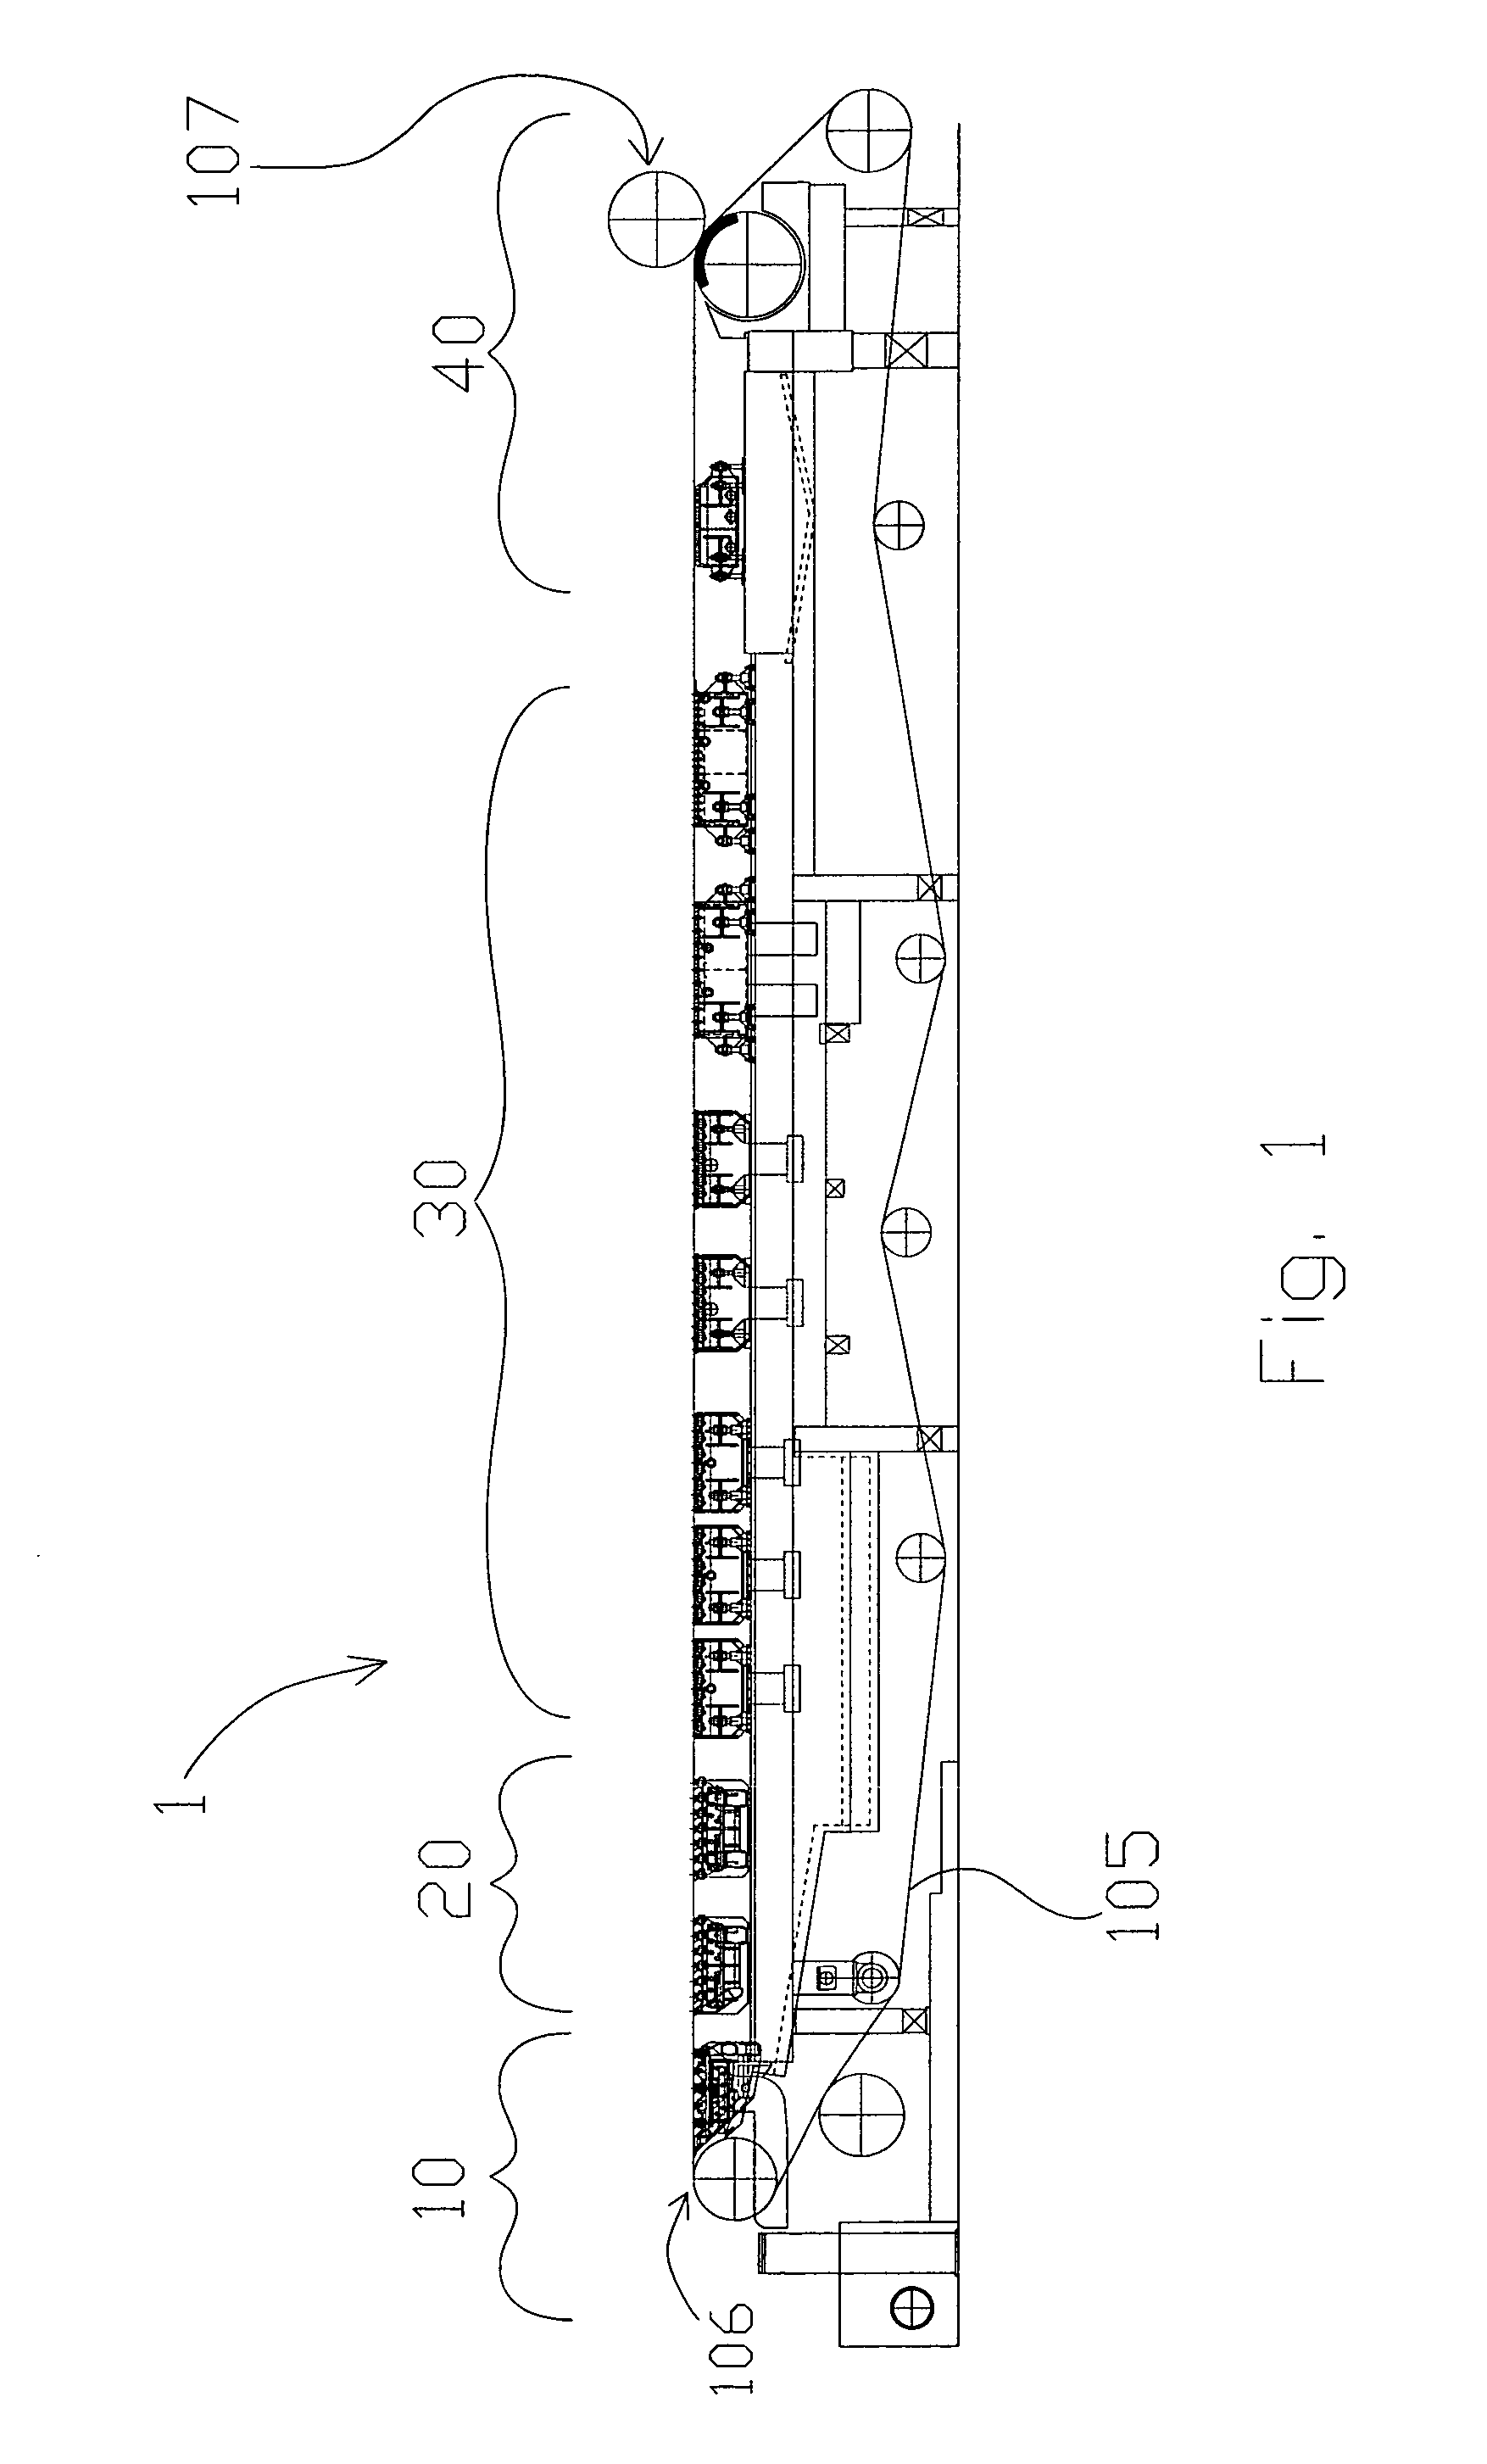 Method and machine for manufacturing paper products using Fourdrinier forming